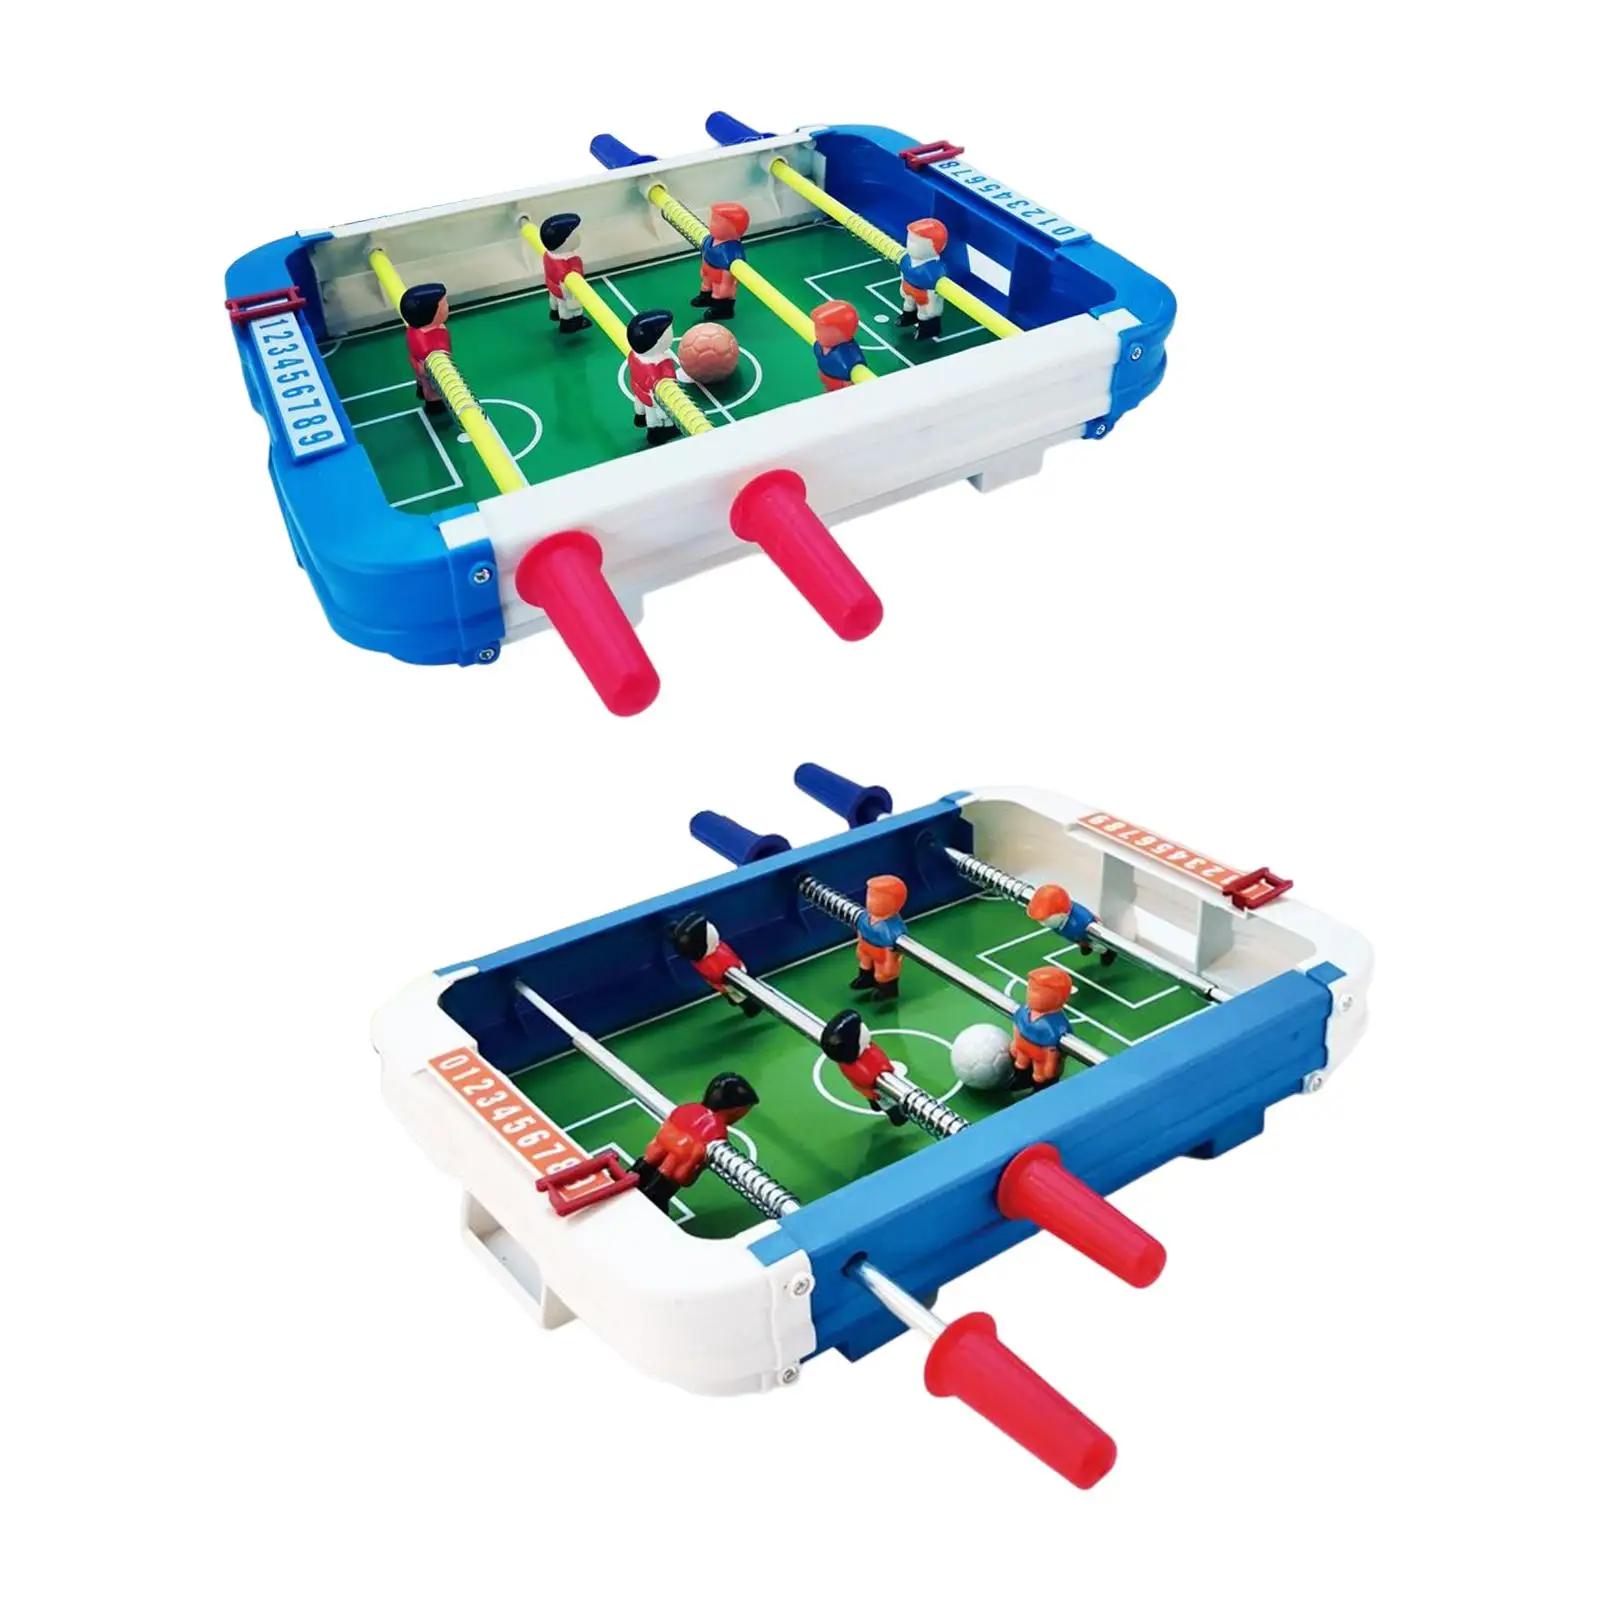 Foosball Table, Table Top Football Game Interactive Toy Table Soccer Table Top Soccer Game for Travel Children Holiday Gifts